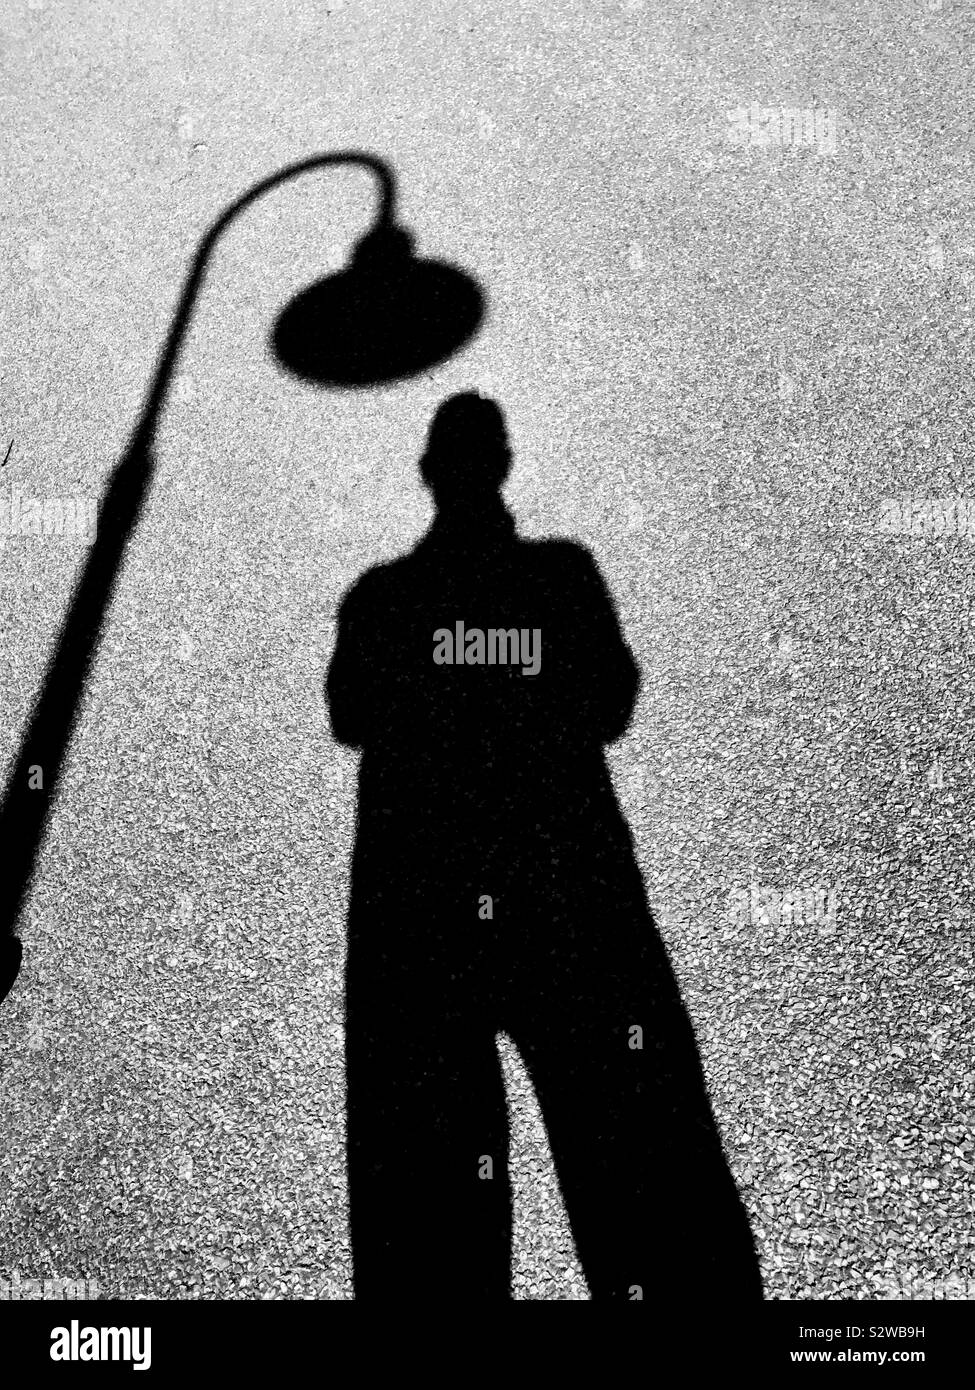 Man under street light silhouetted on pavement Stock Photo